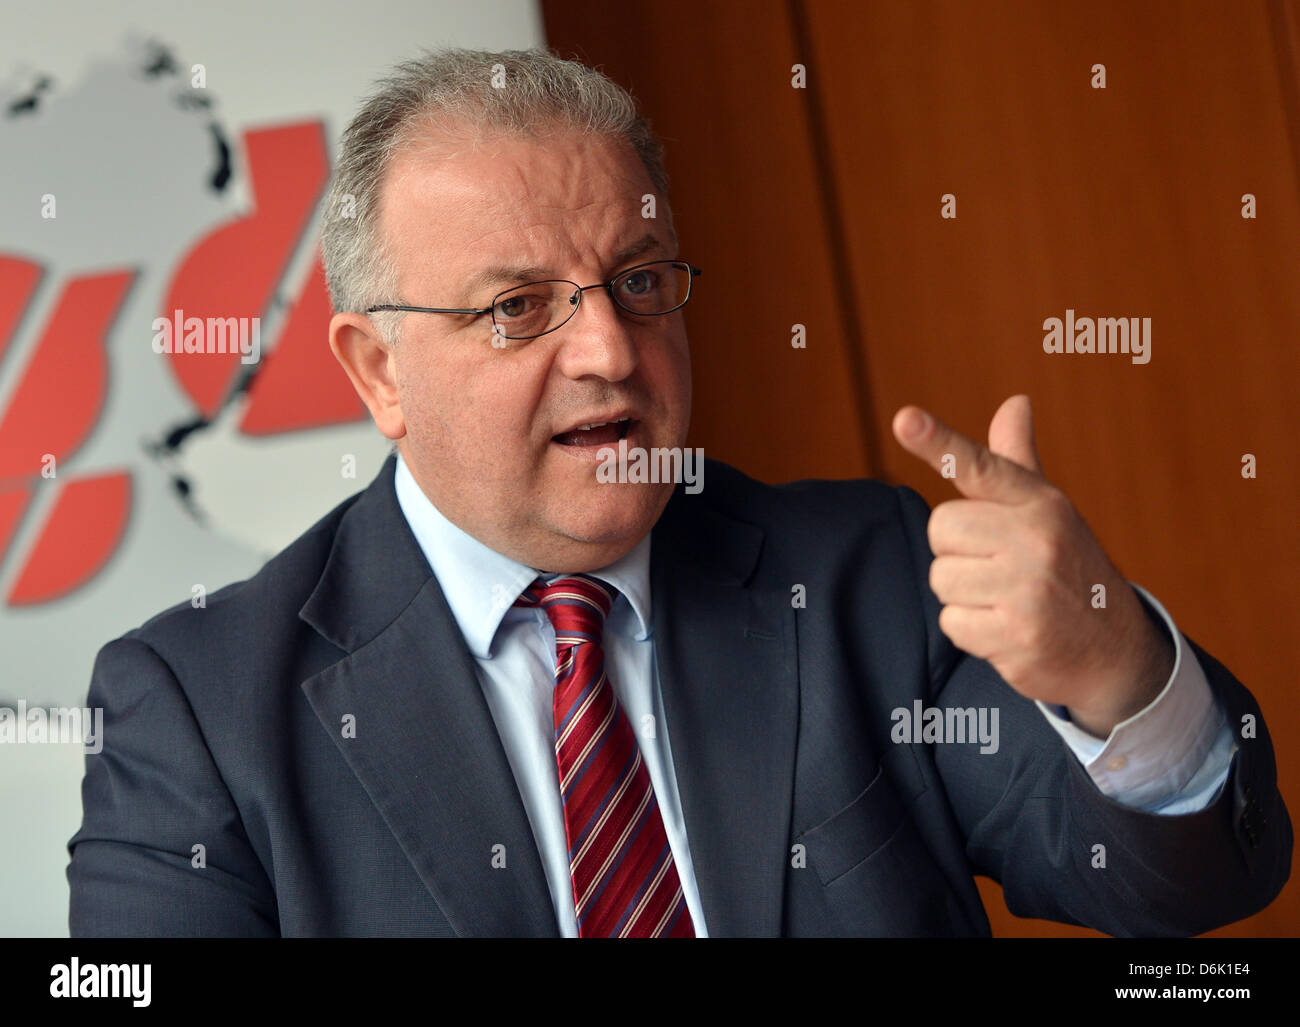 Federal chairman of the Turkish Community Germany (TGD), Kenan Kolat, speaks at a press conference in Berlin, Germany, 19 April 2013. The TGD intends to initiate a Science Award: awards in the categories Human-, Social-, Natural- and Technology Sciences and with a prize money of 5.000 euros each shall be introduced. Photo: BRITTA PEDERSEN Stock Photo